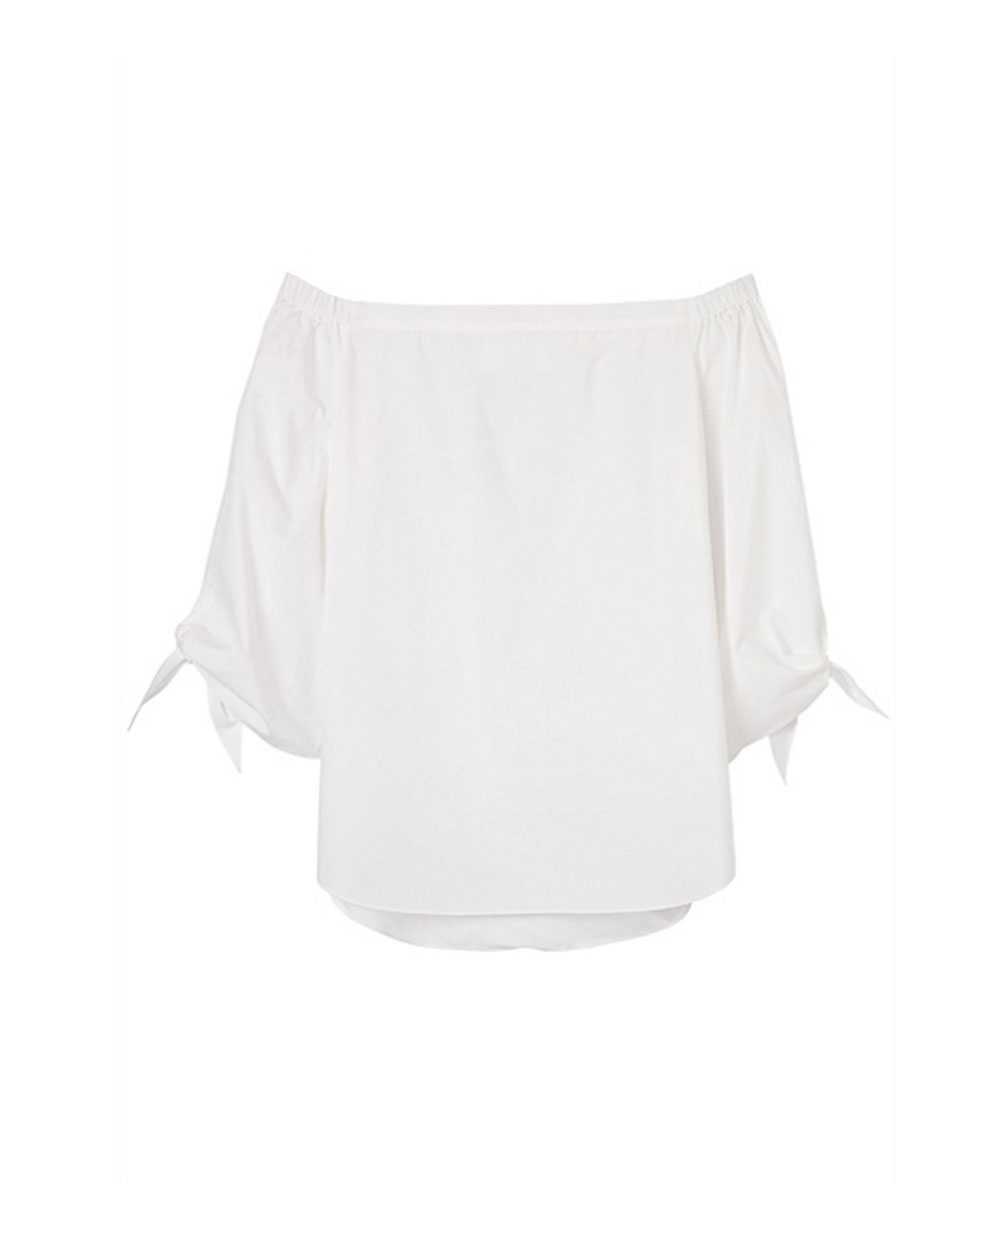 THE SHOULDER-SKIMMING TOP: $109 from Country Road